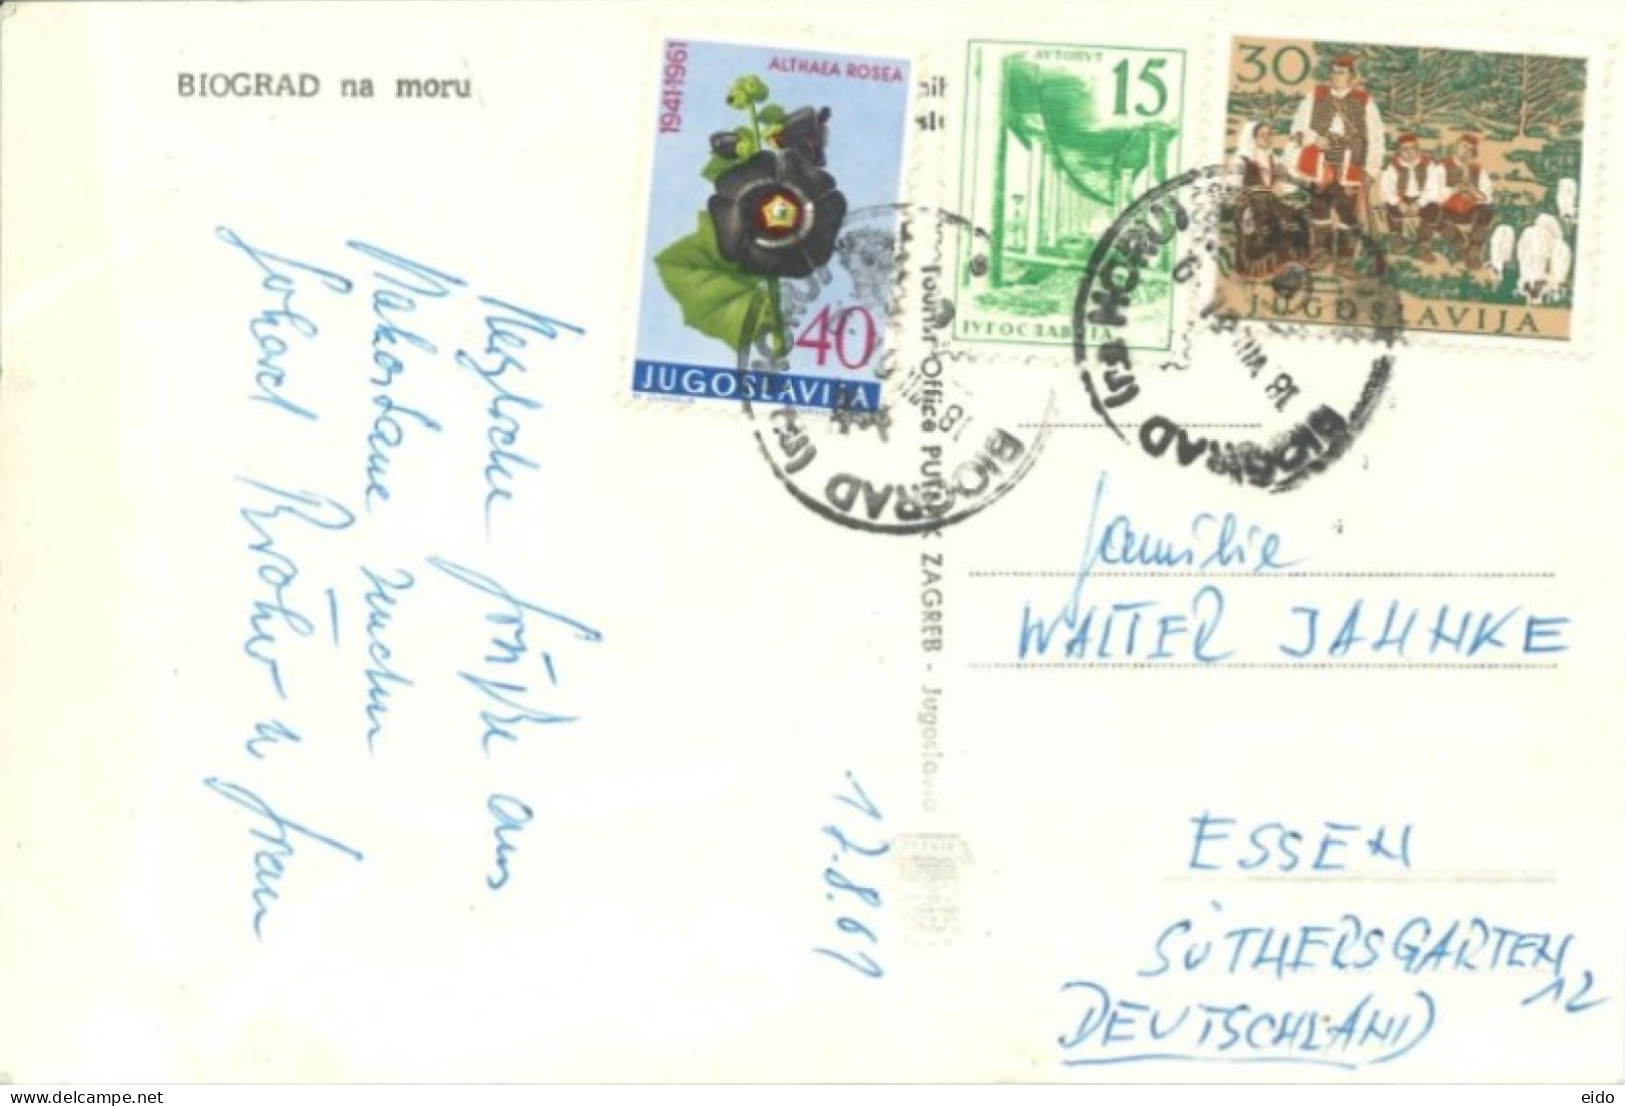 YUGOSLAVIA - 1996, BIOGRAD NA MORU REAL PHOTO POSTCARD WITH STAMPS SENT TO GERMANY. - Lettres & Documents